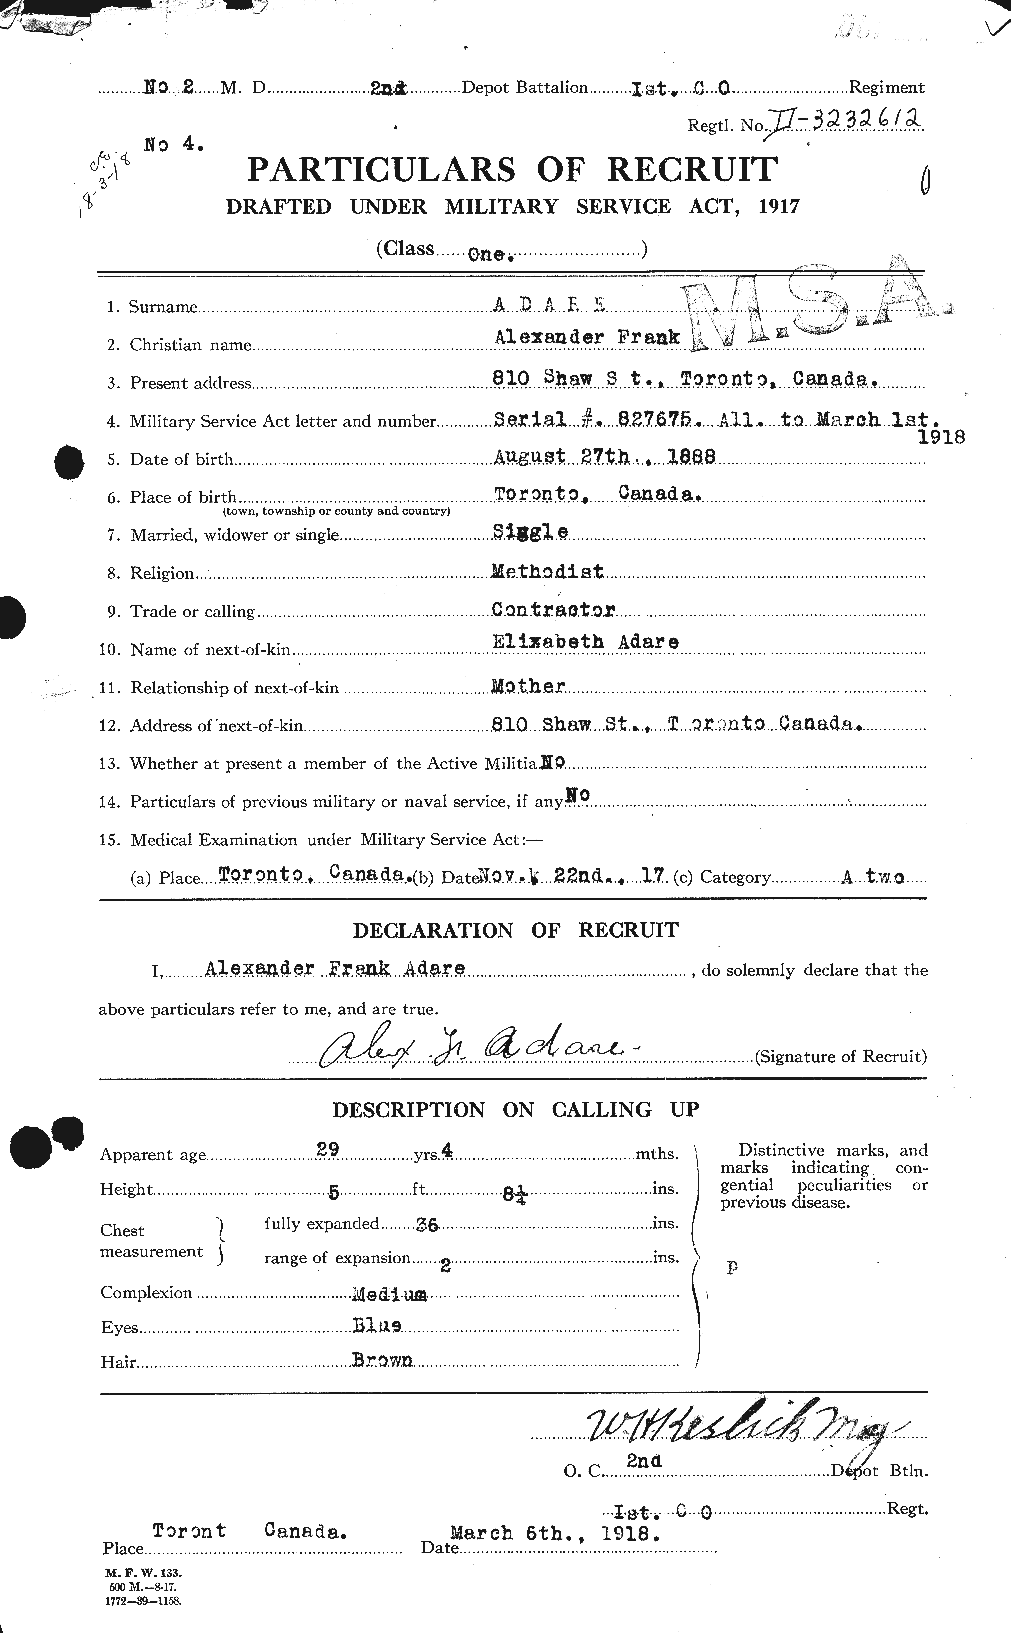 Personnel Records of the First World War - CEF 202418a